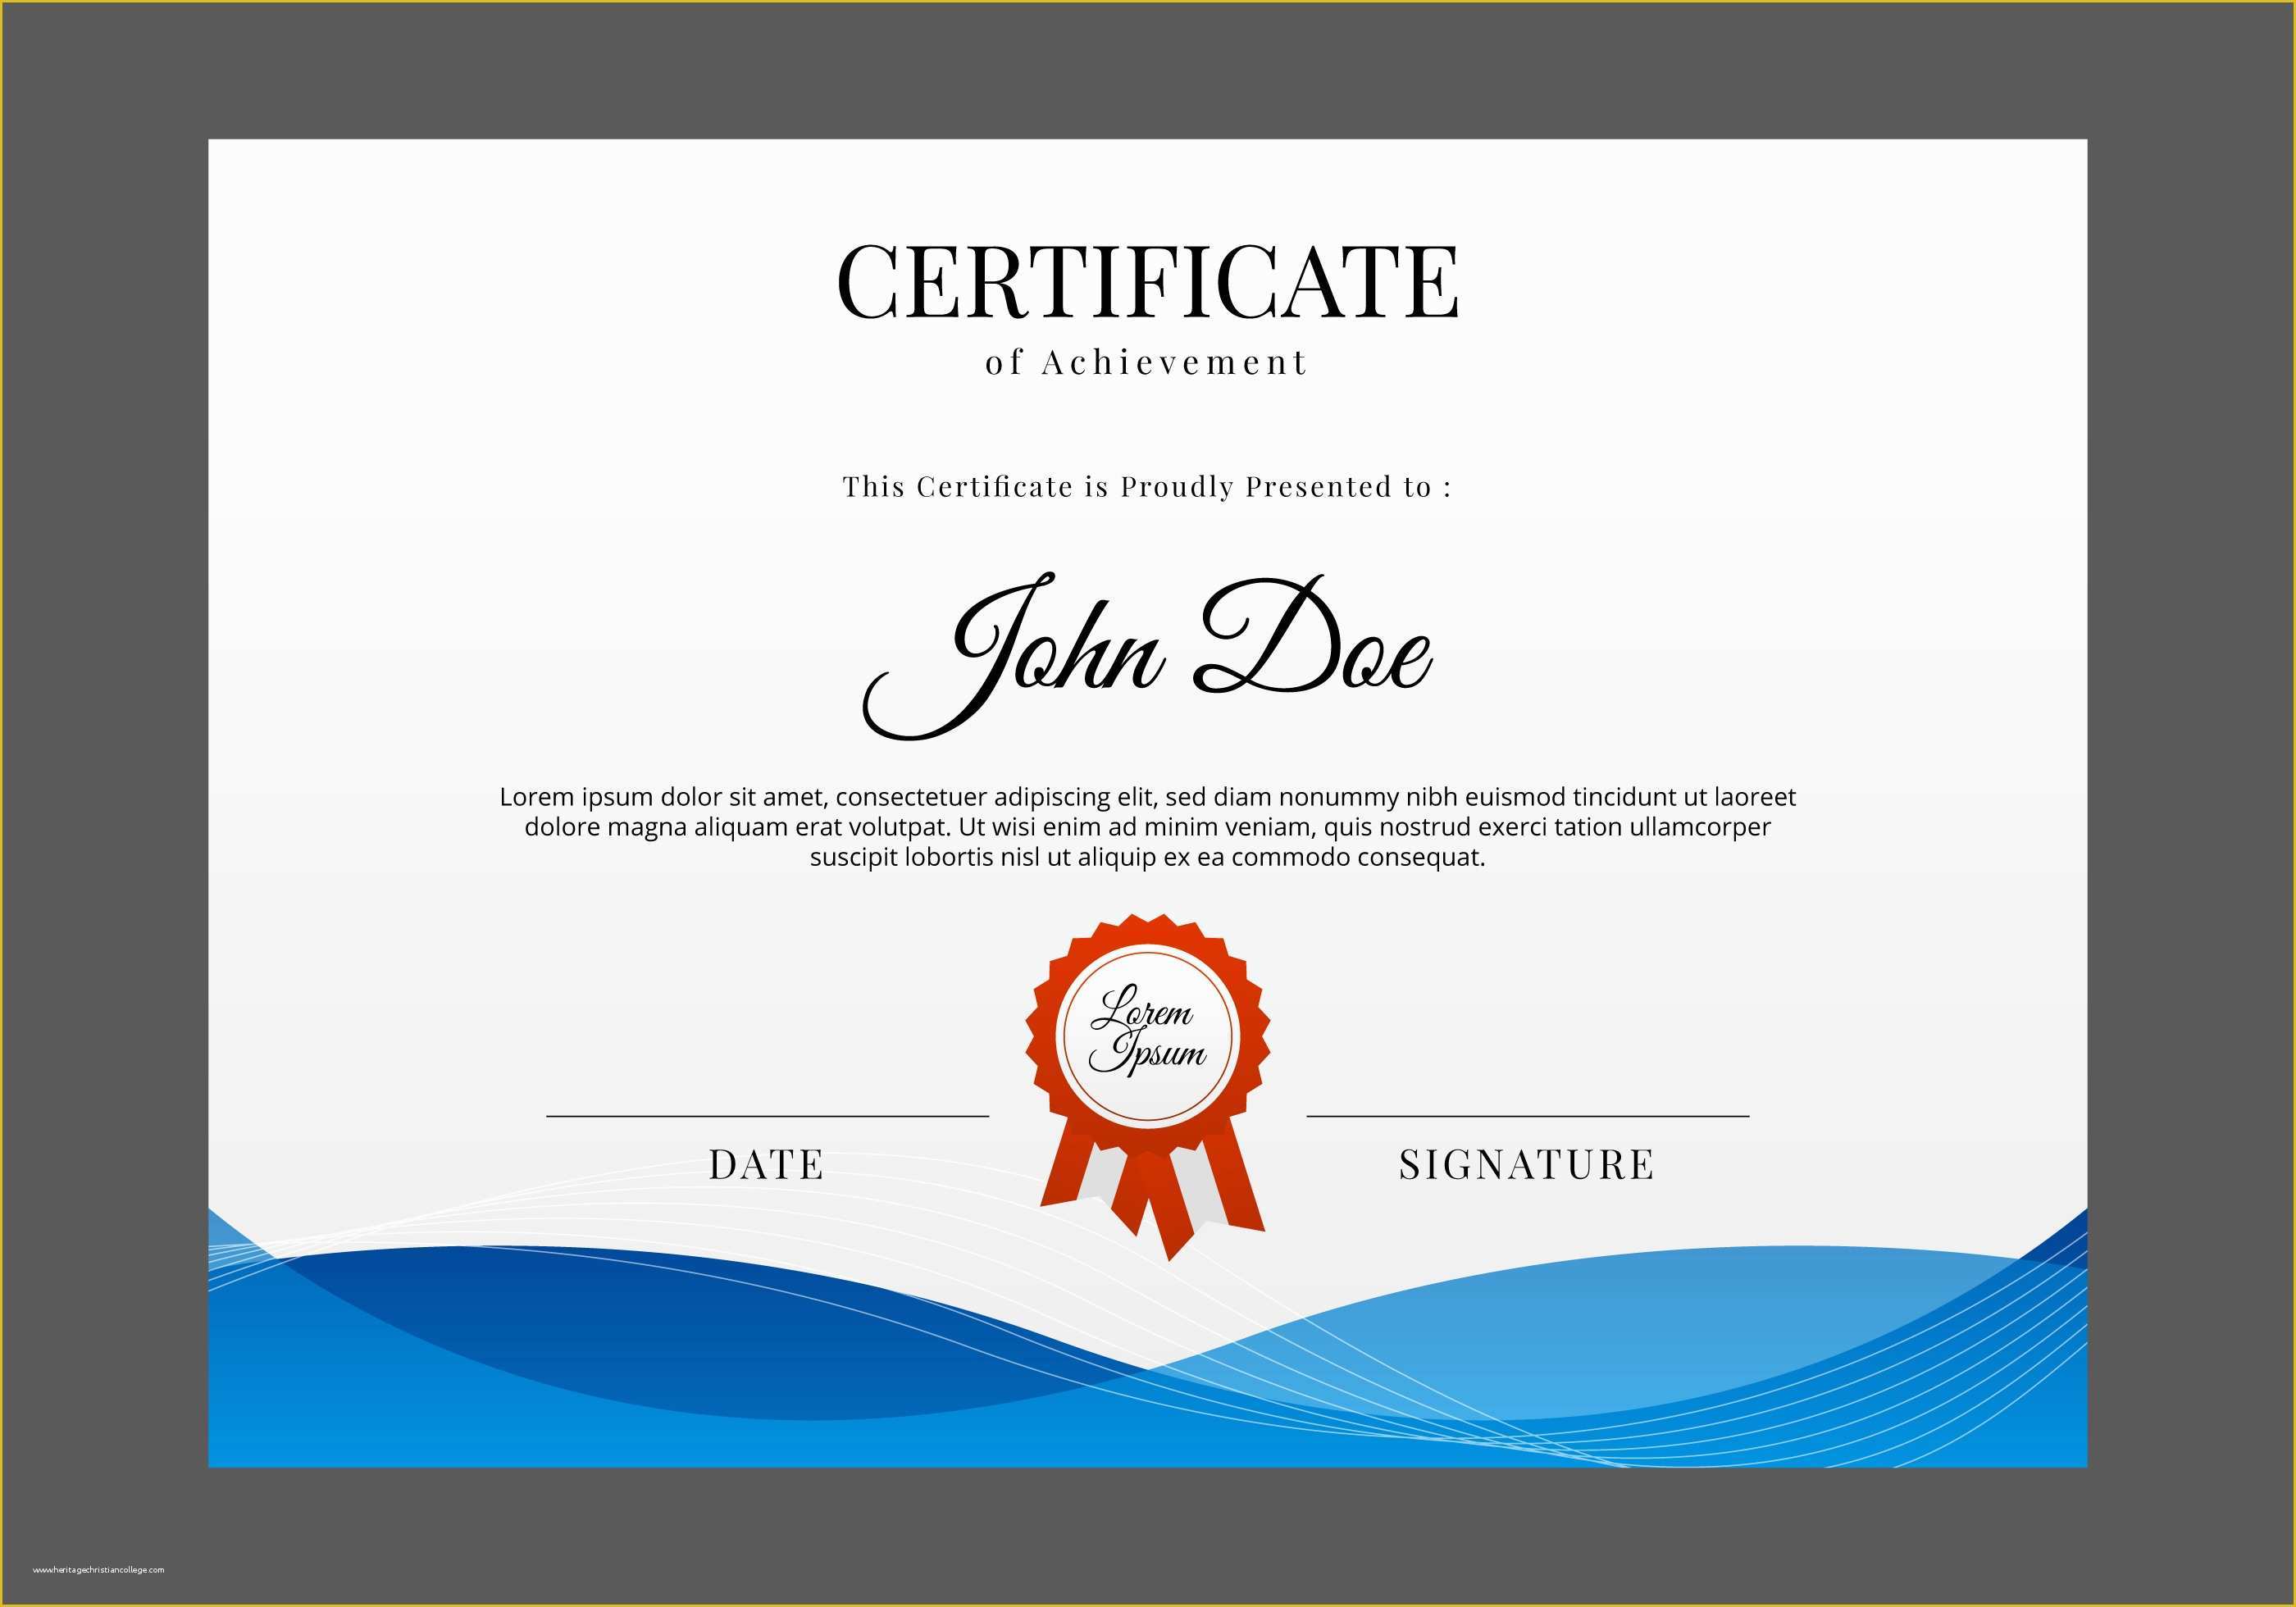 Diploma Certificate Template Free Download Of Free Certificate Template Vector Download Free Vector